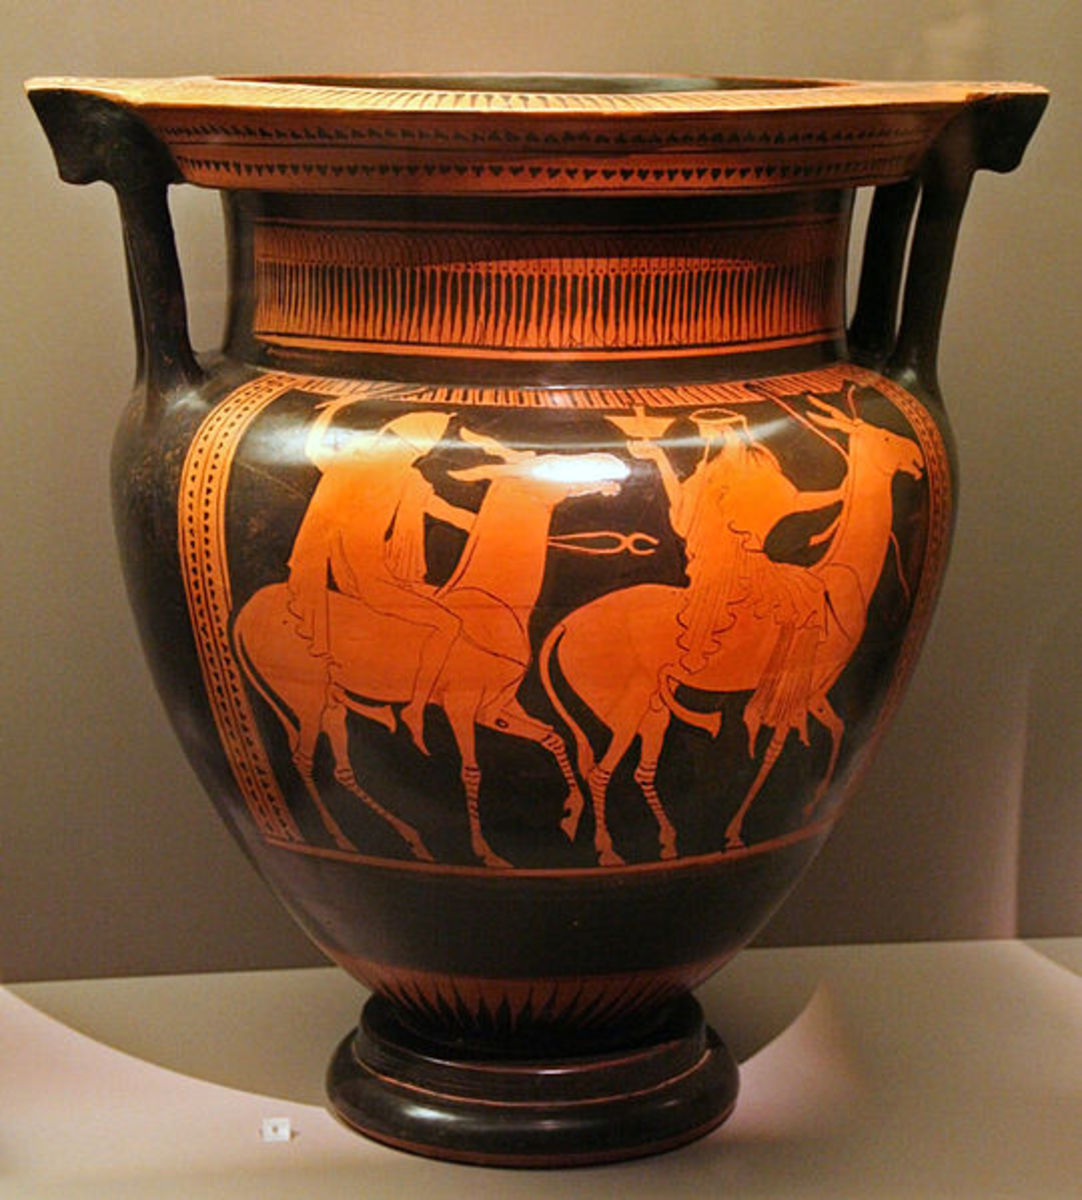 Hephaistos returning with Dionysus. Attic Red Figure Krater from Museum of Cycladic Art, Athens